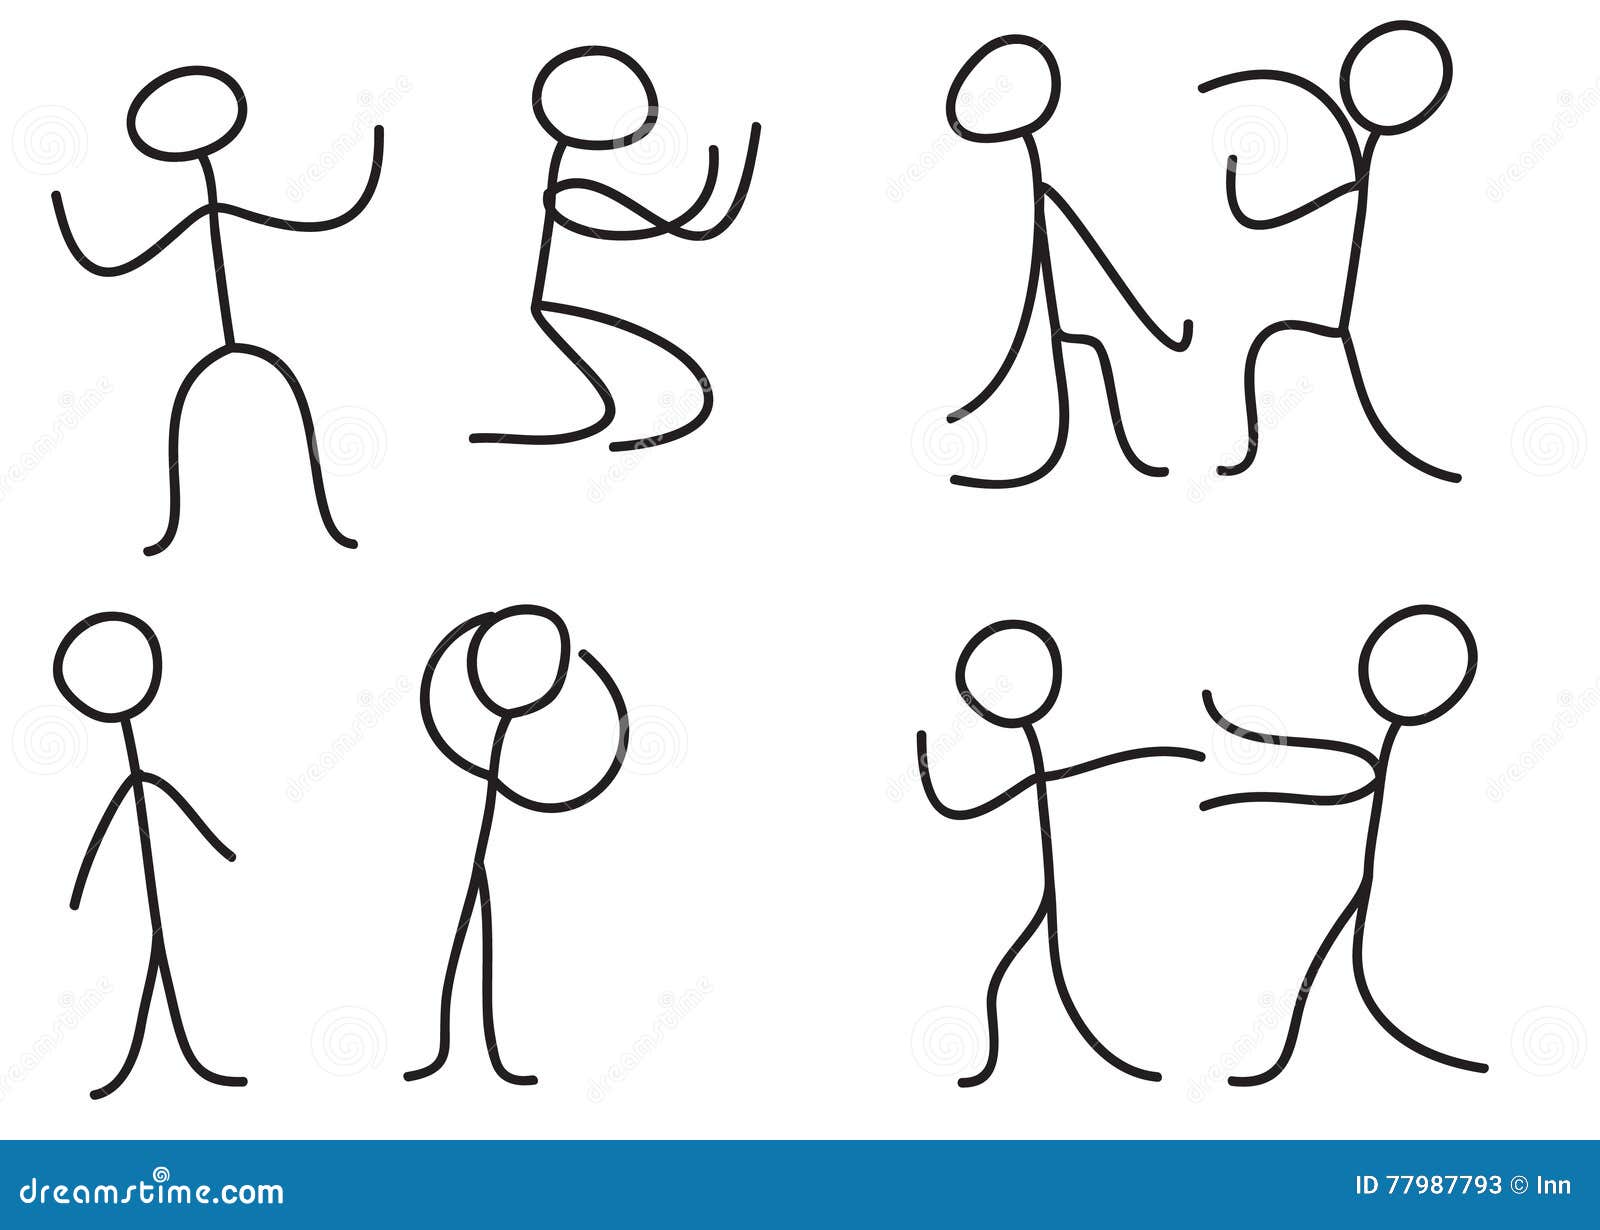 Stick Figure Stickman Stick Man People Person Poses Postures Emotions  Expressions Feelings Body Languages Download Icons PNG SVG Vector